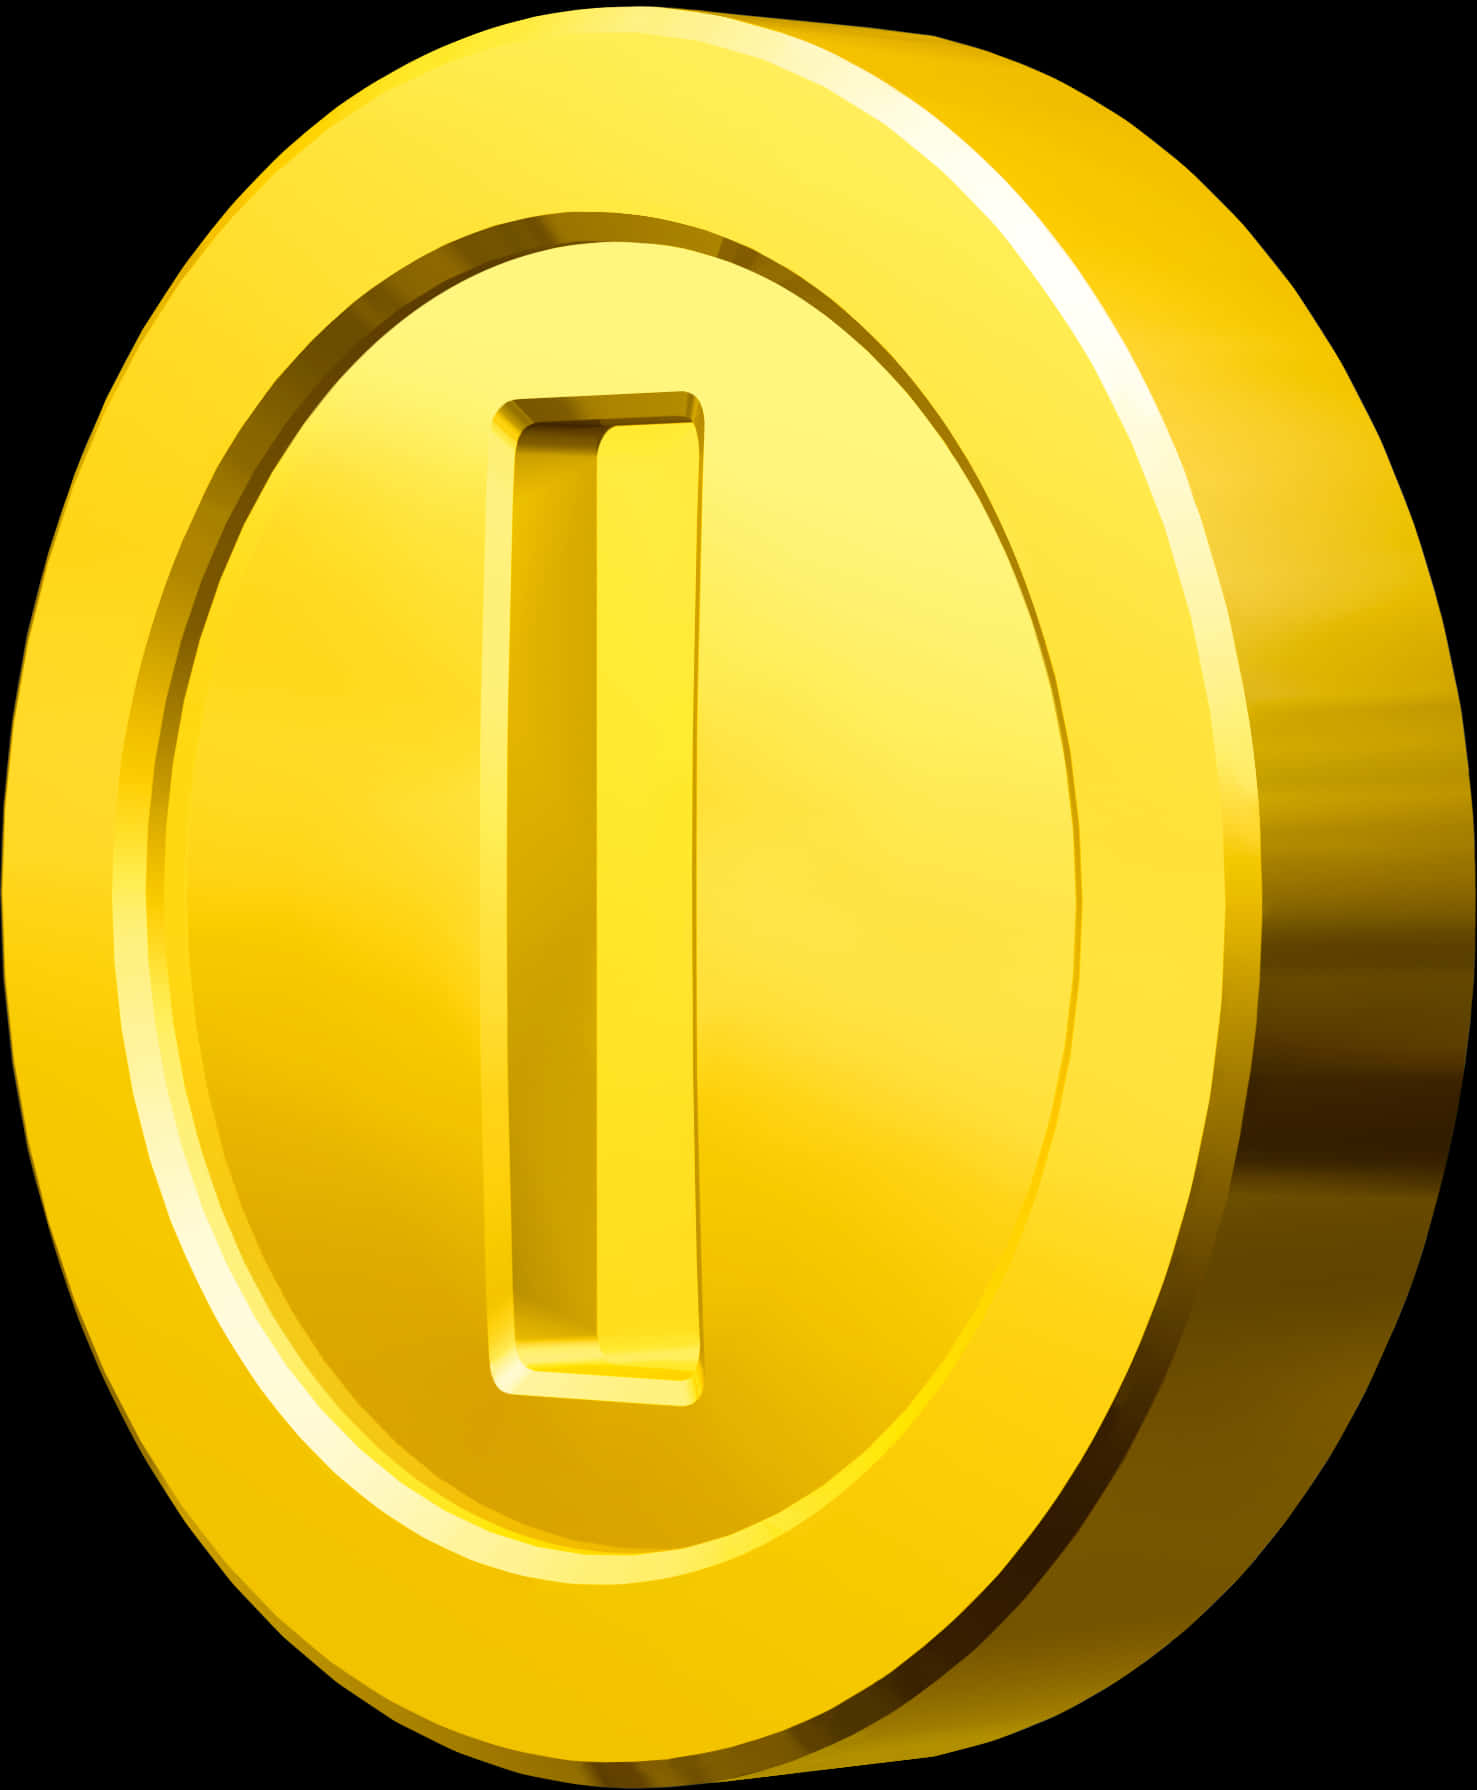 A Gold Coin With A Letter I